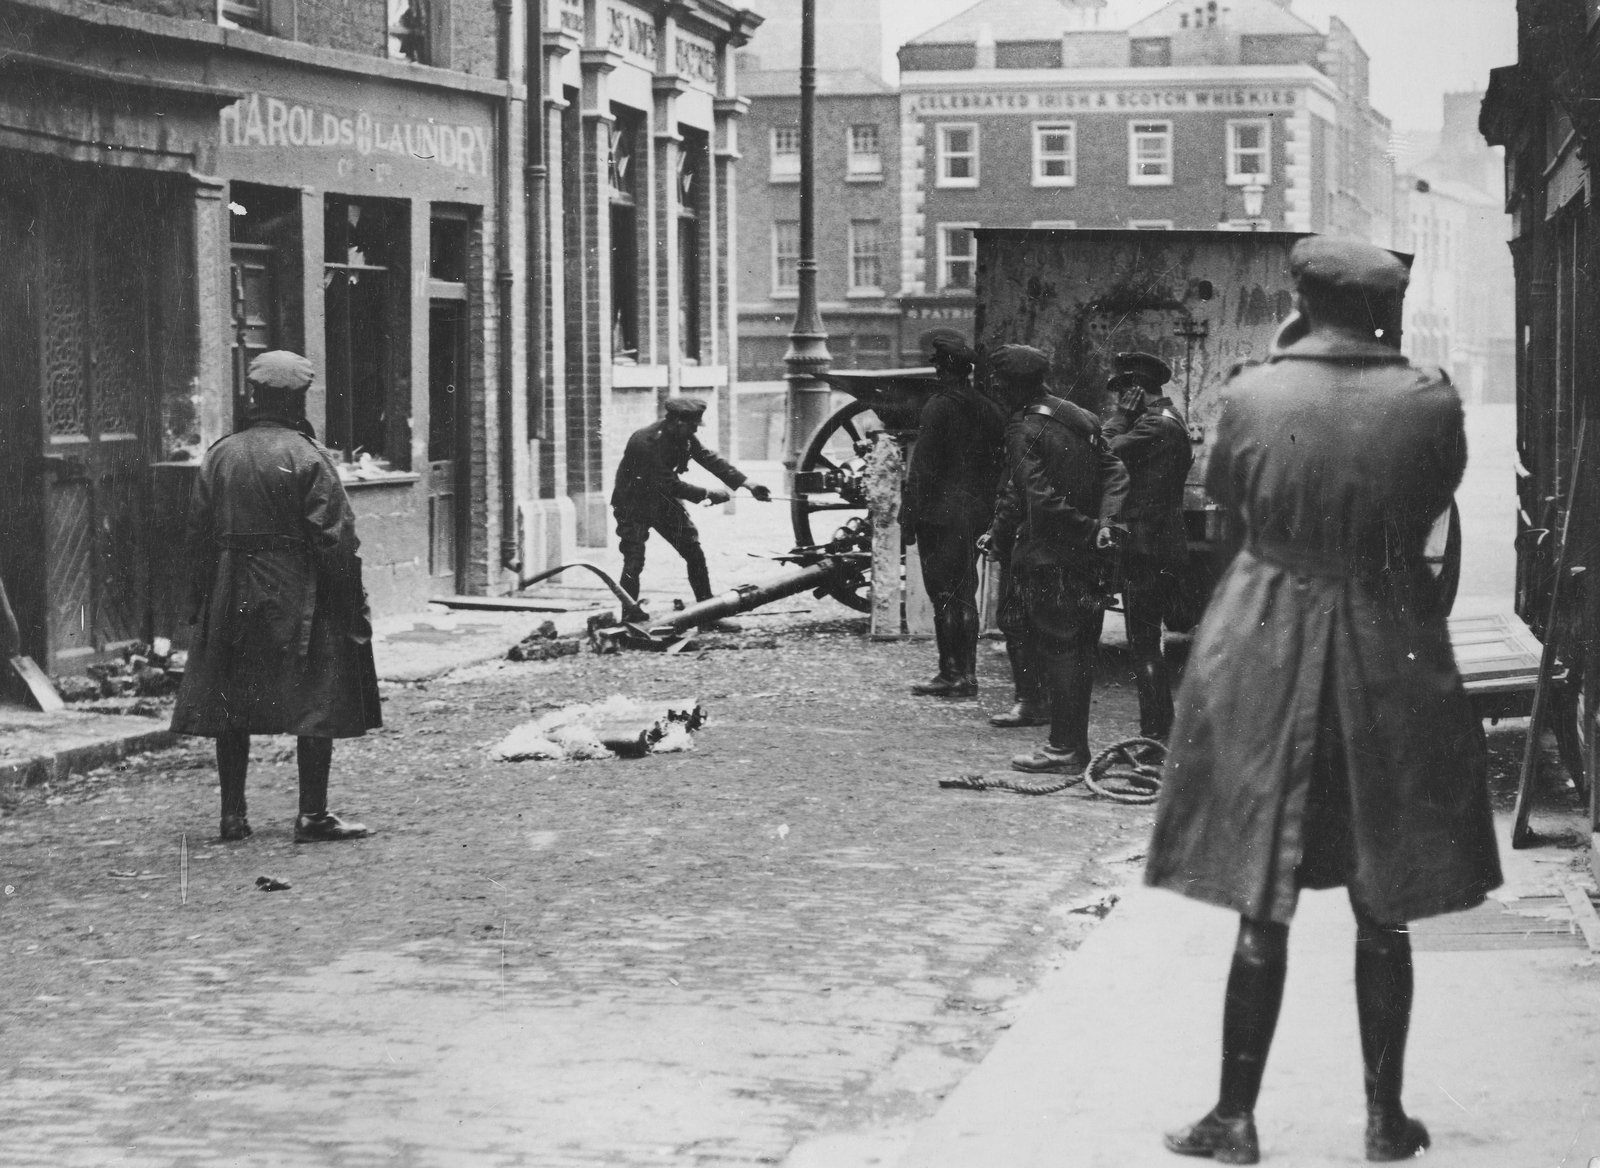 Image - An 18-pounder gun fires on the Four Courts from Bridge Street. Image courtesy of the National Library of Ireland